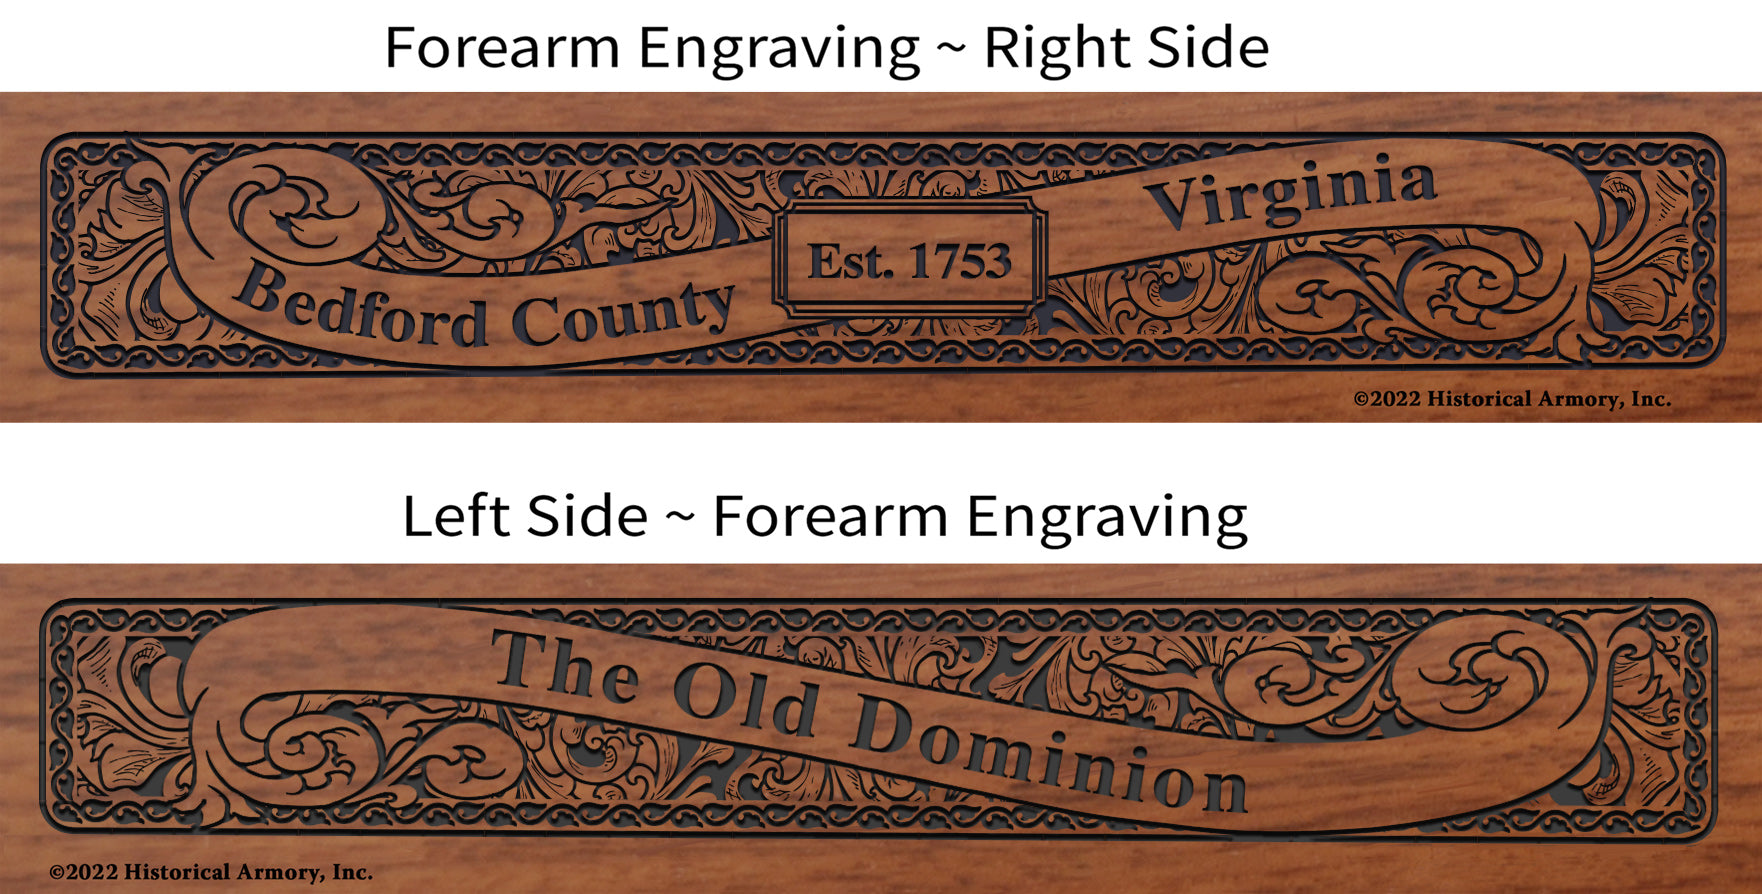 Bedford County Virginia Engraved Rifle Forearm